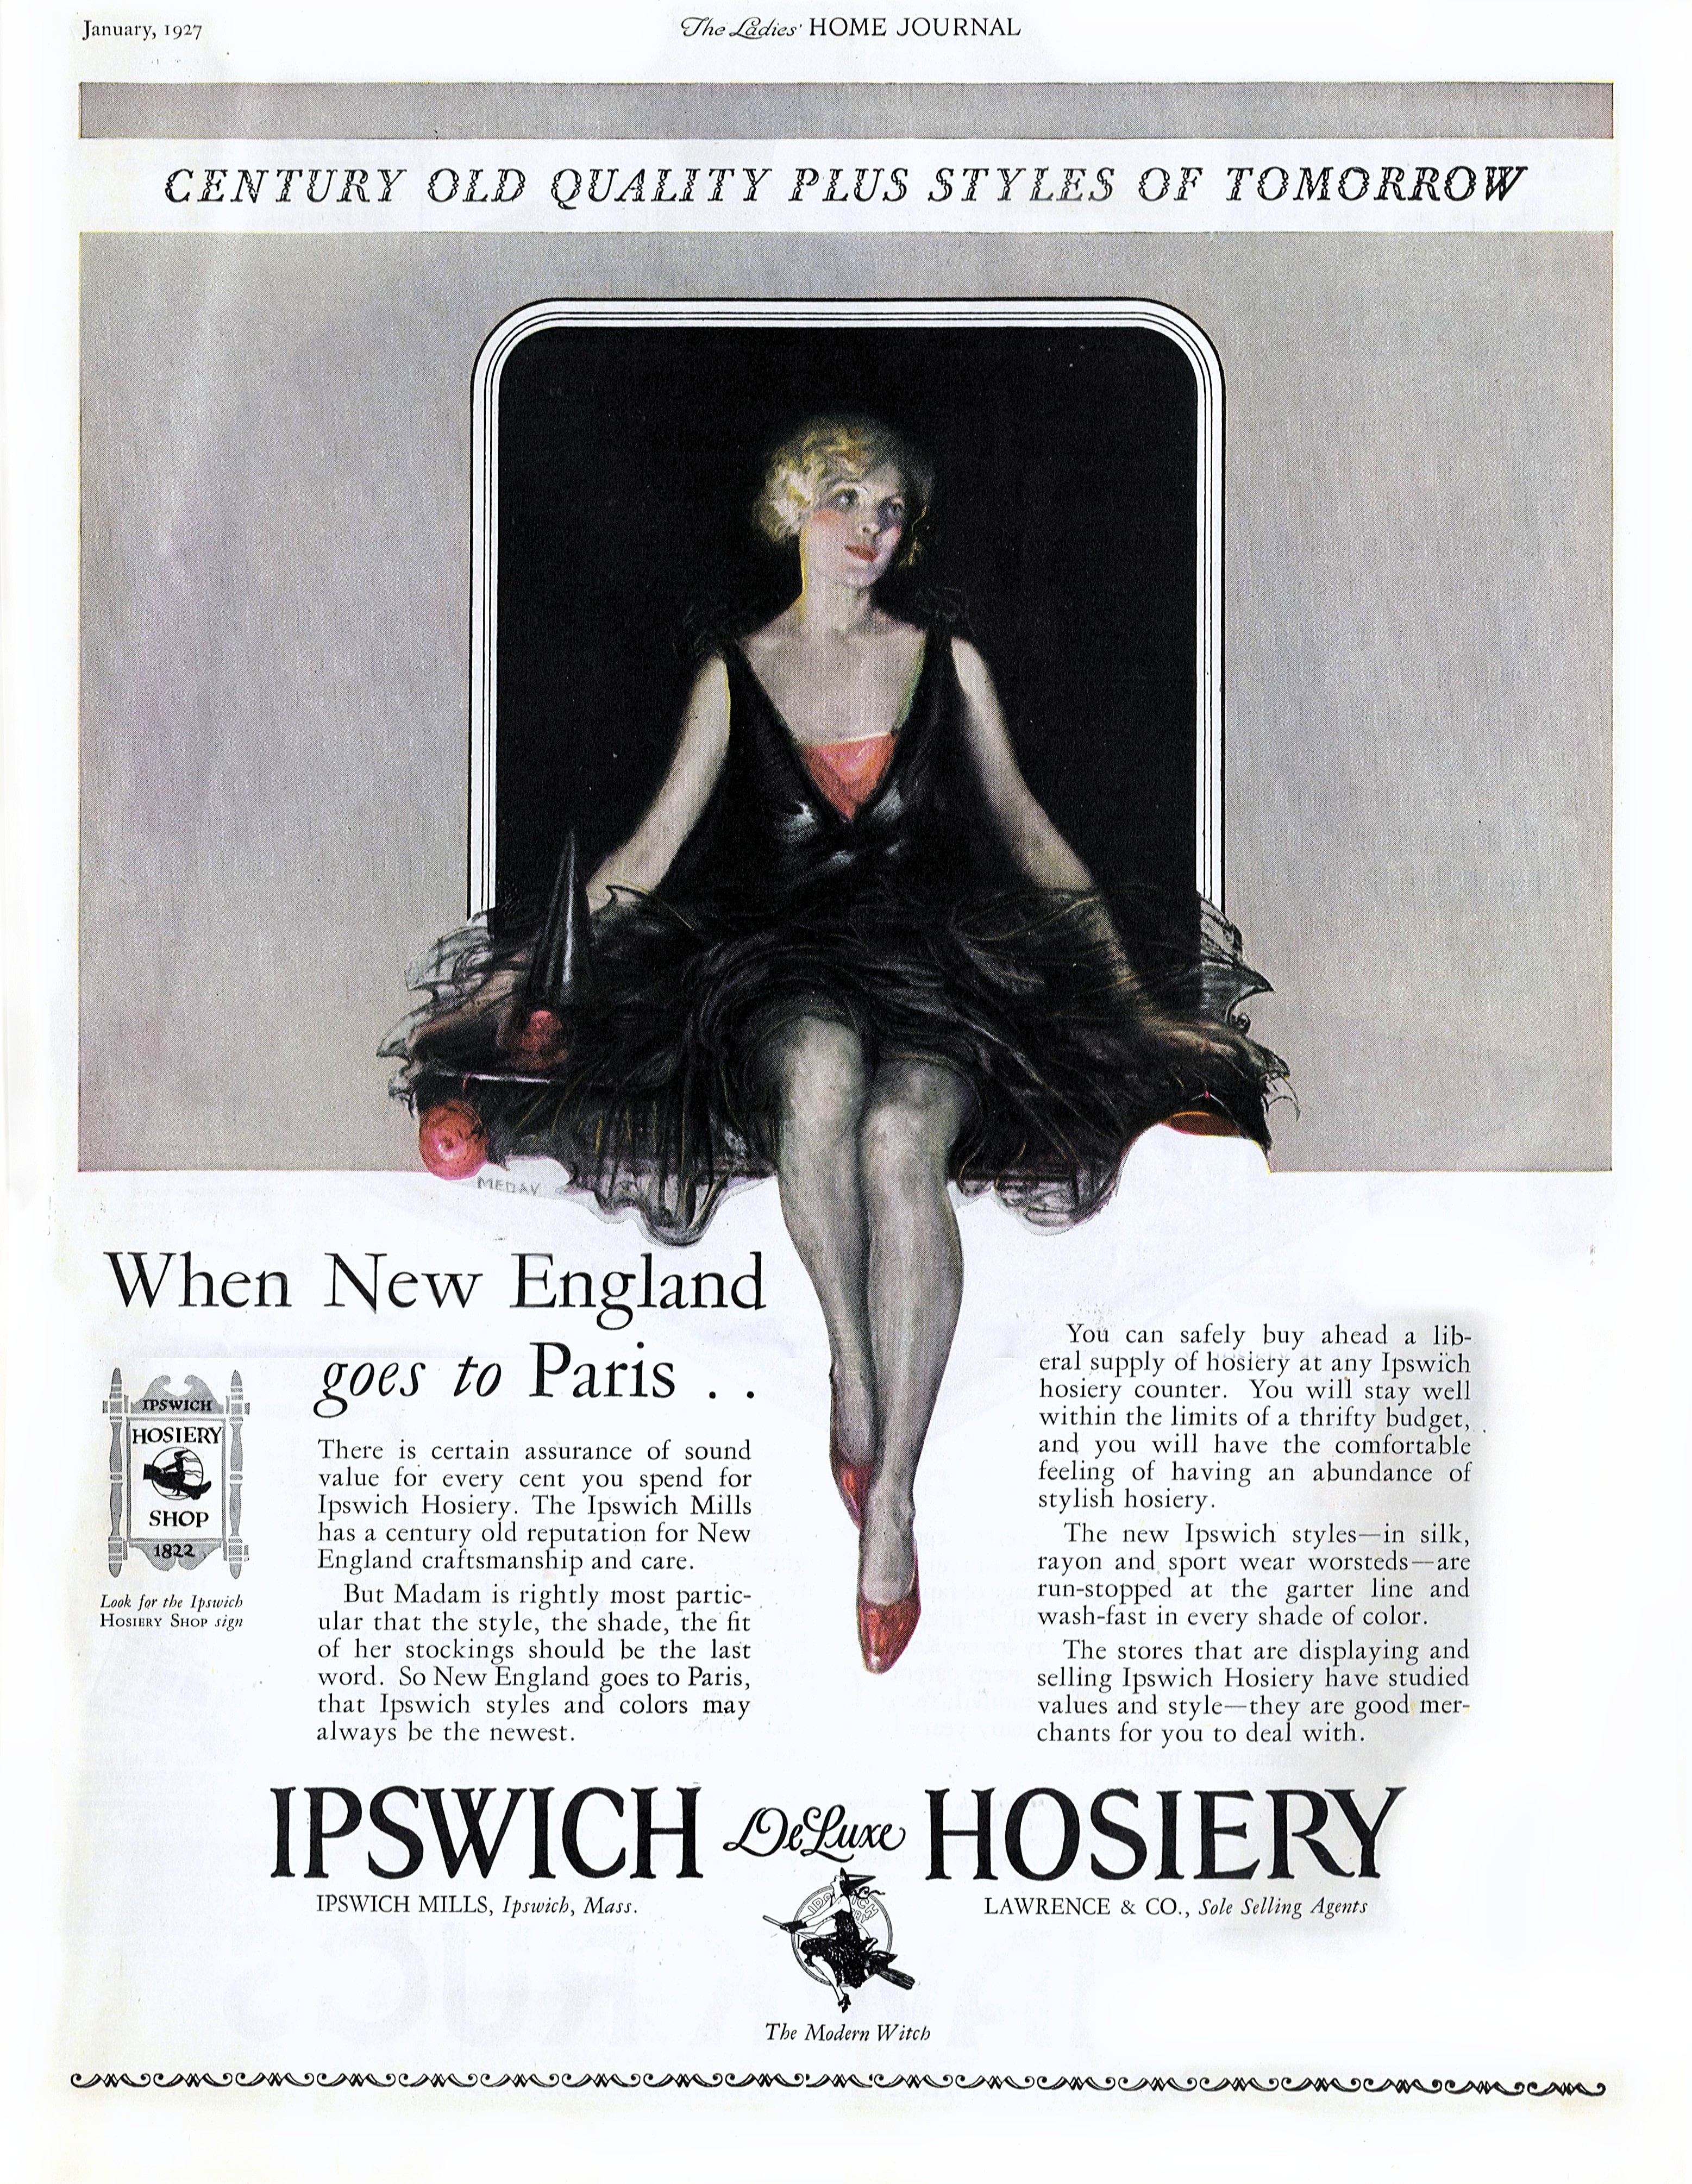 Ipswitch Hosiery - published in Ladies' Home Journal - January 1927